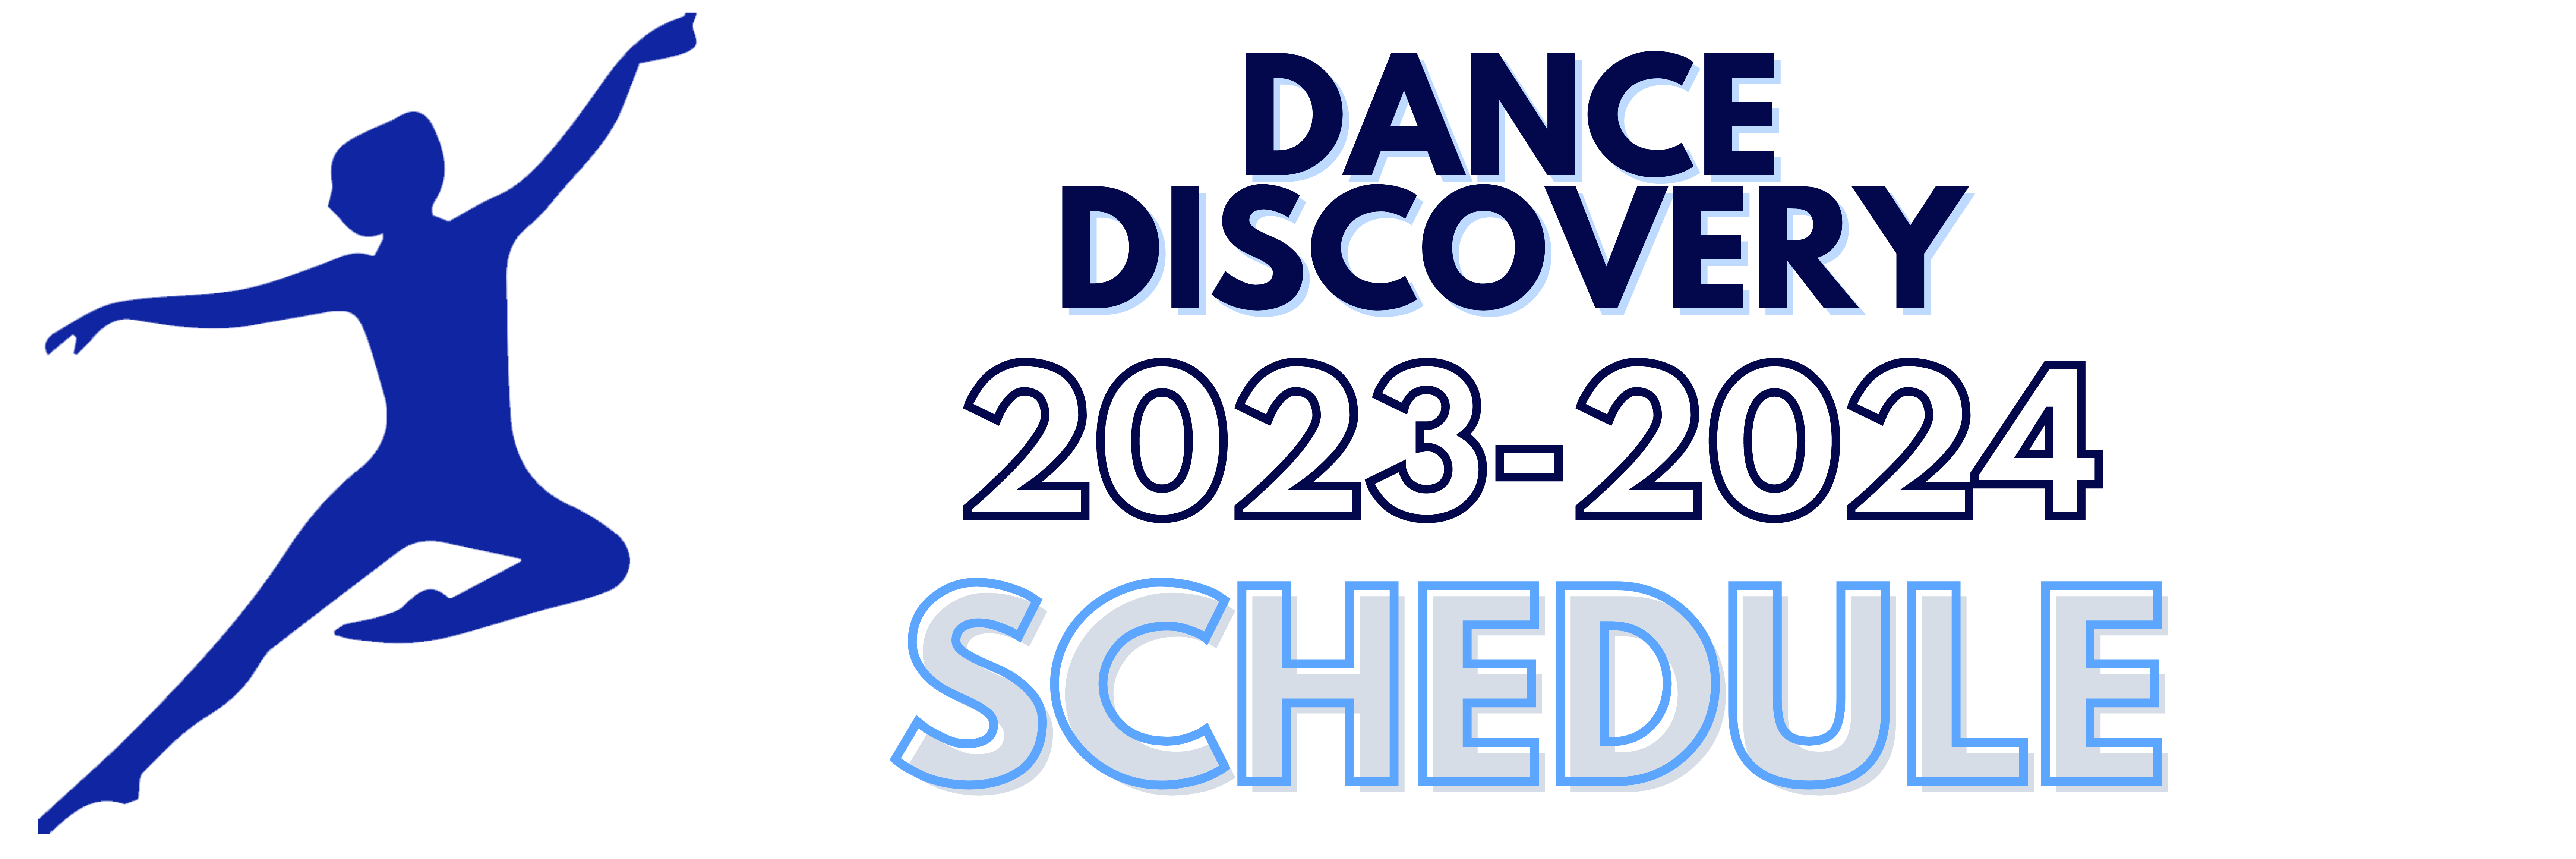 dance discovery schedule